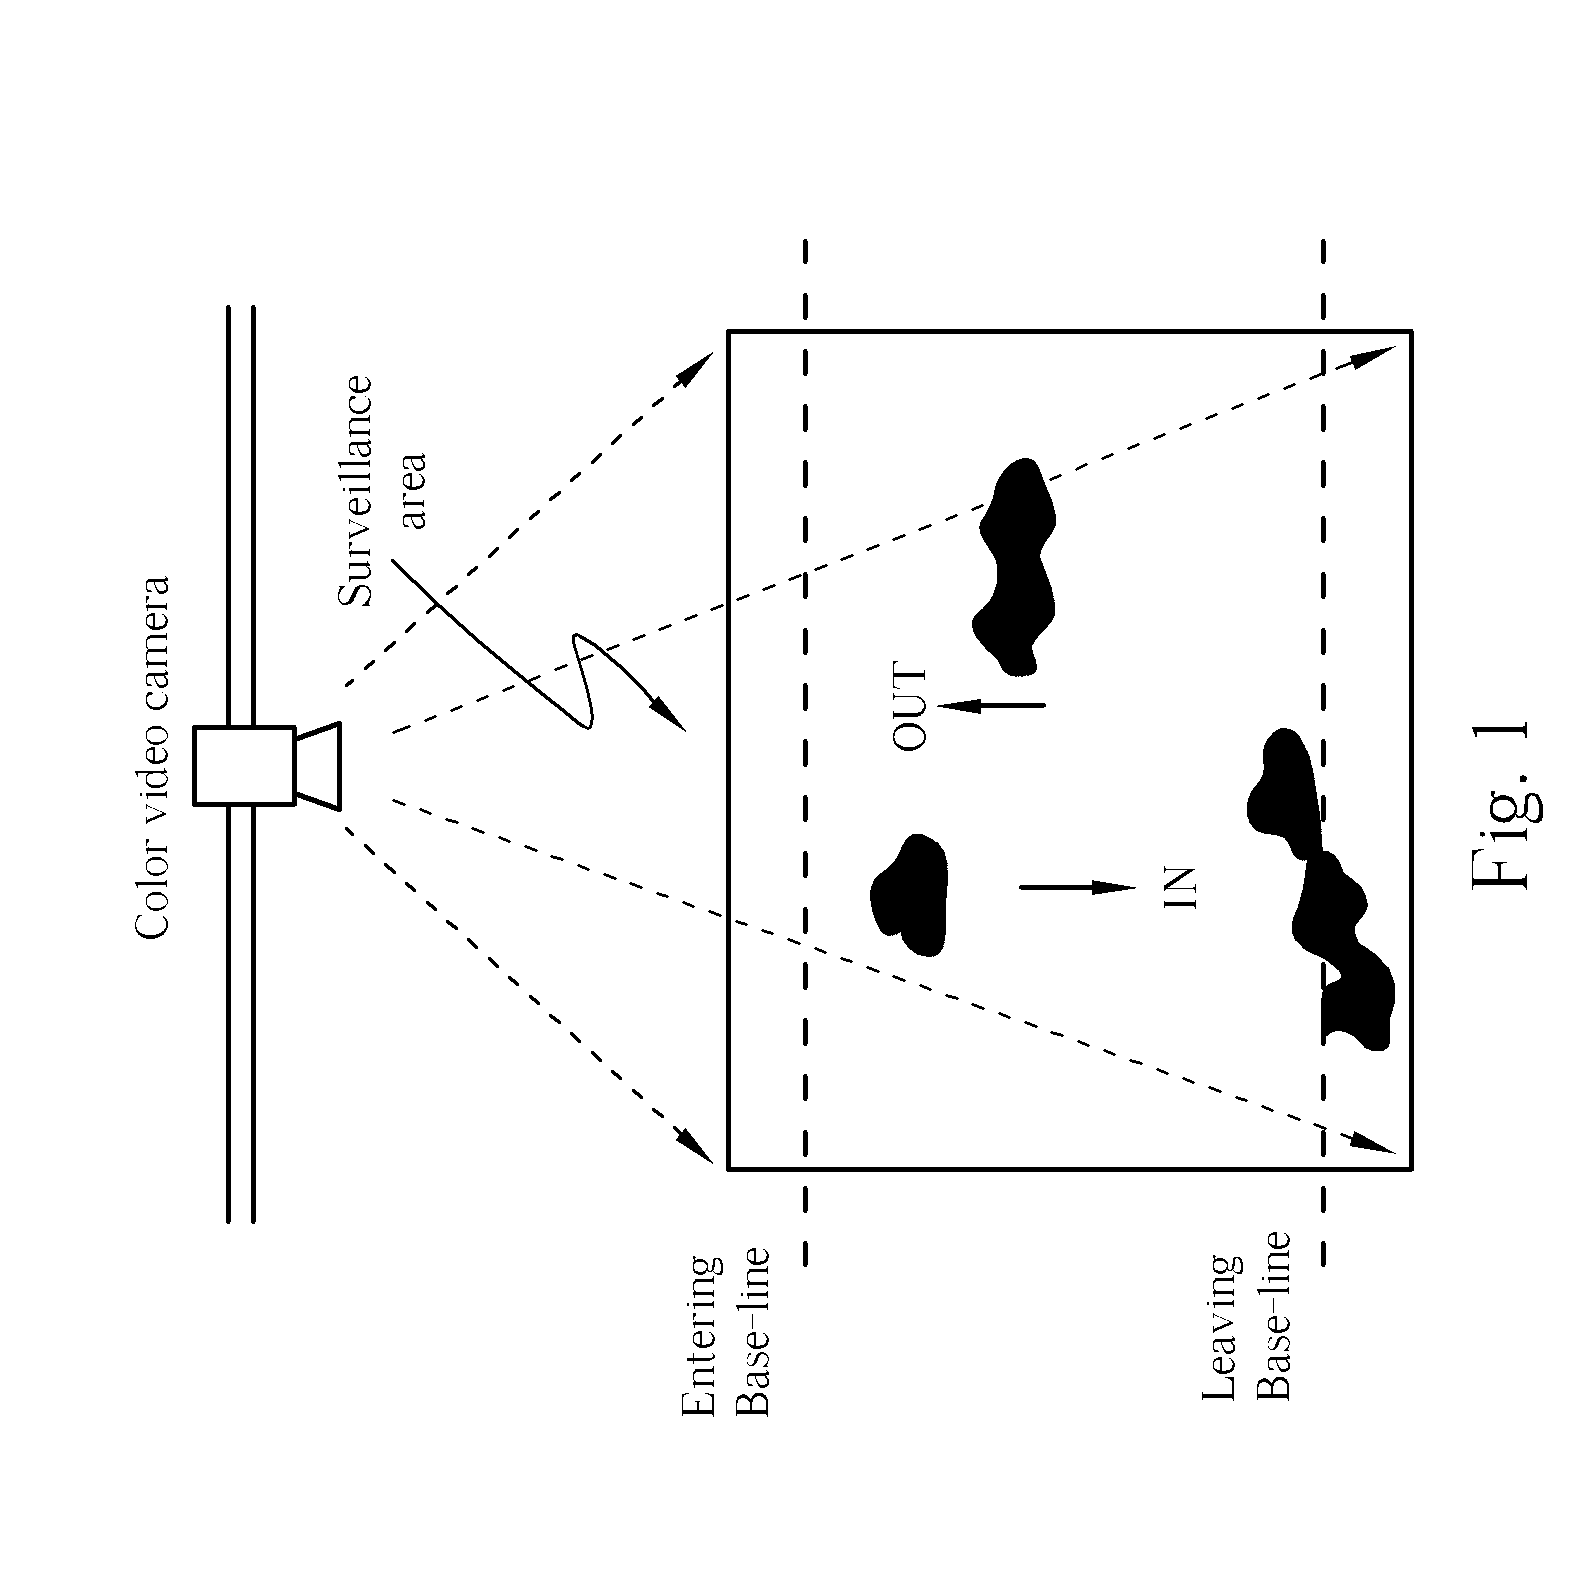 Method for counting people passing through a gate